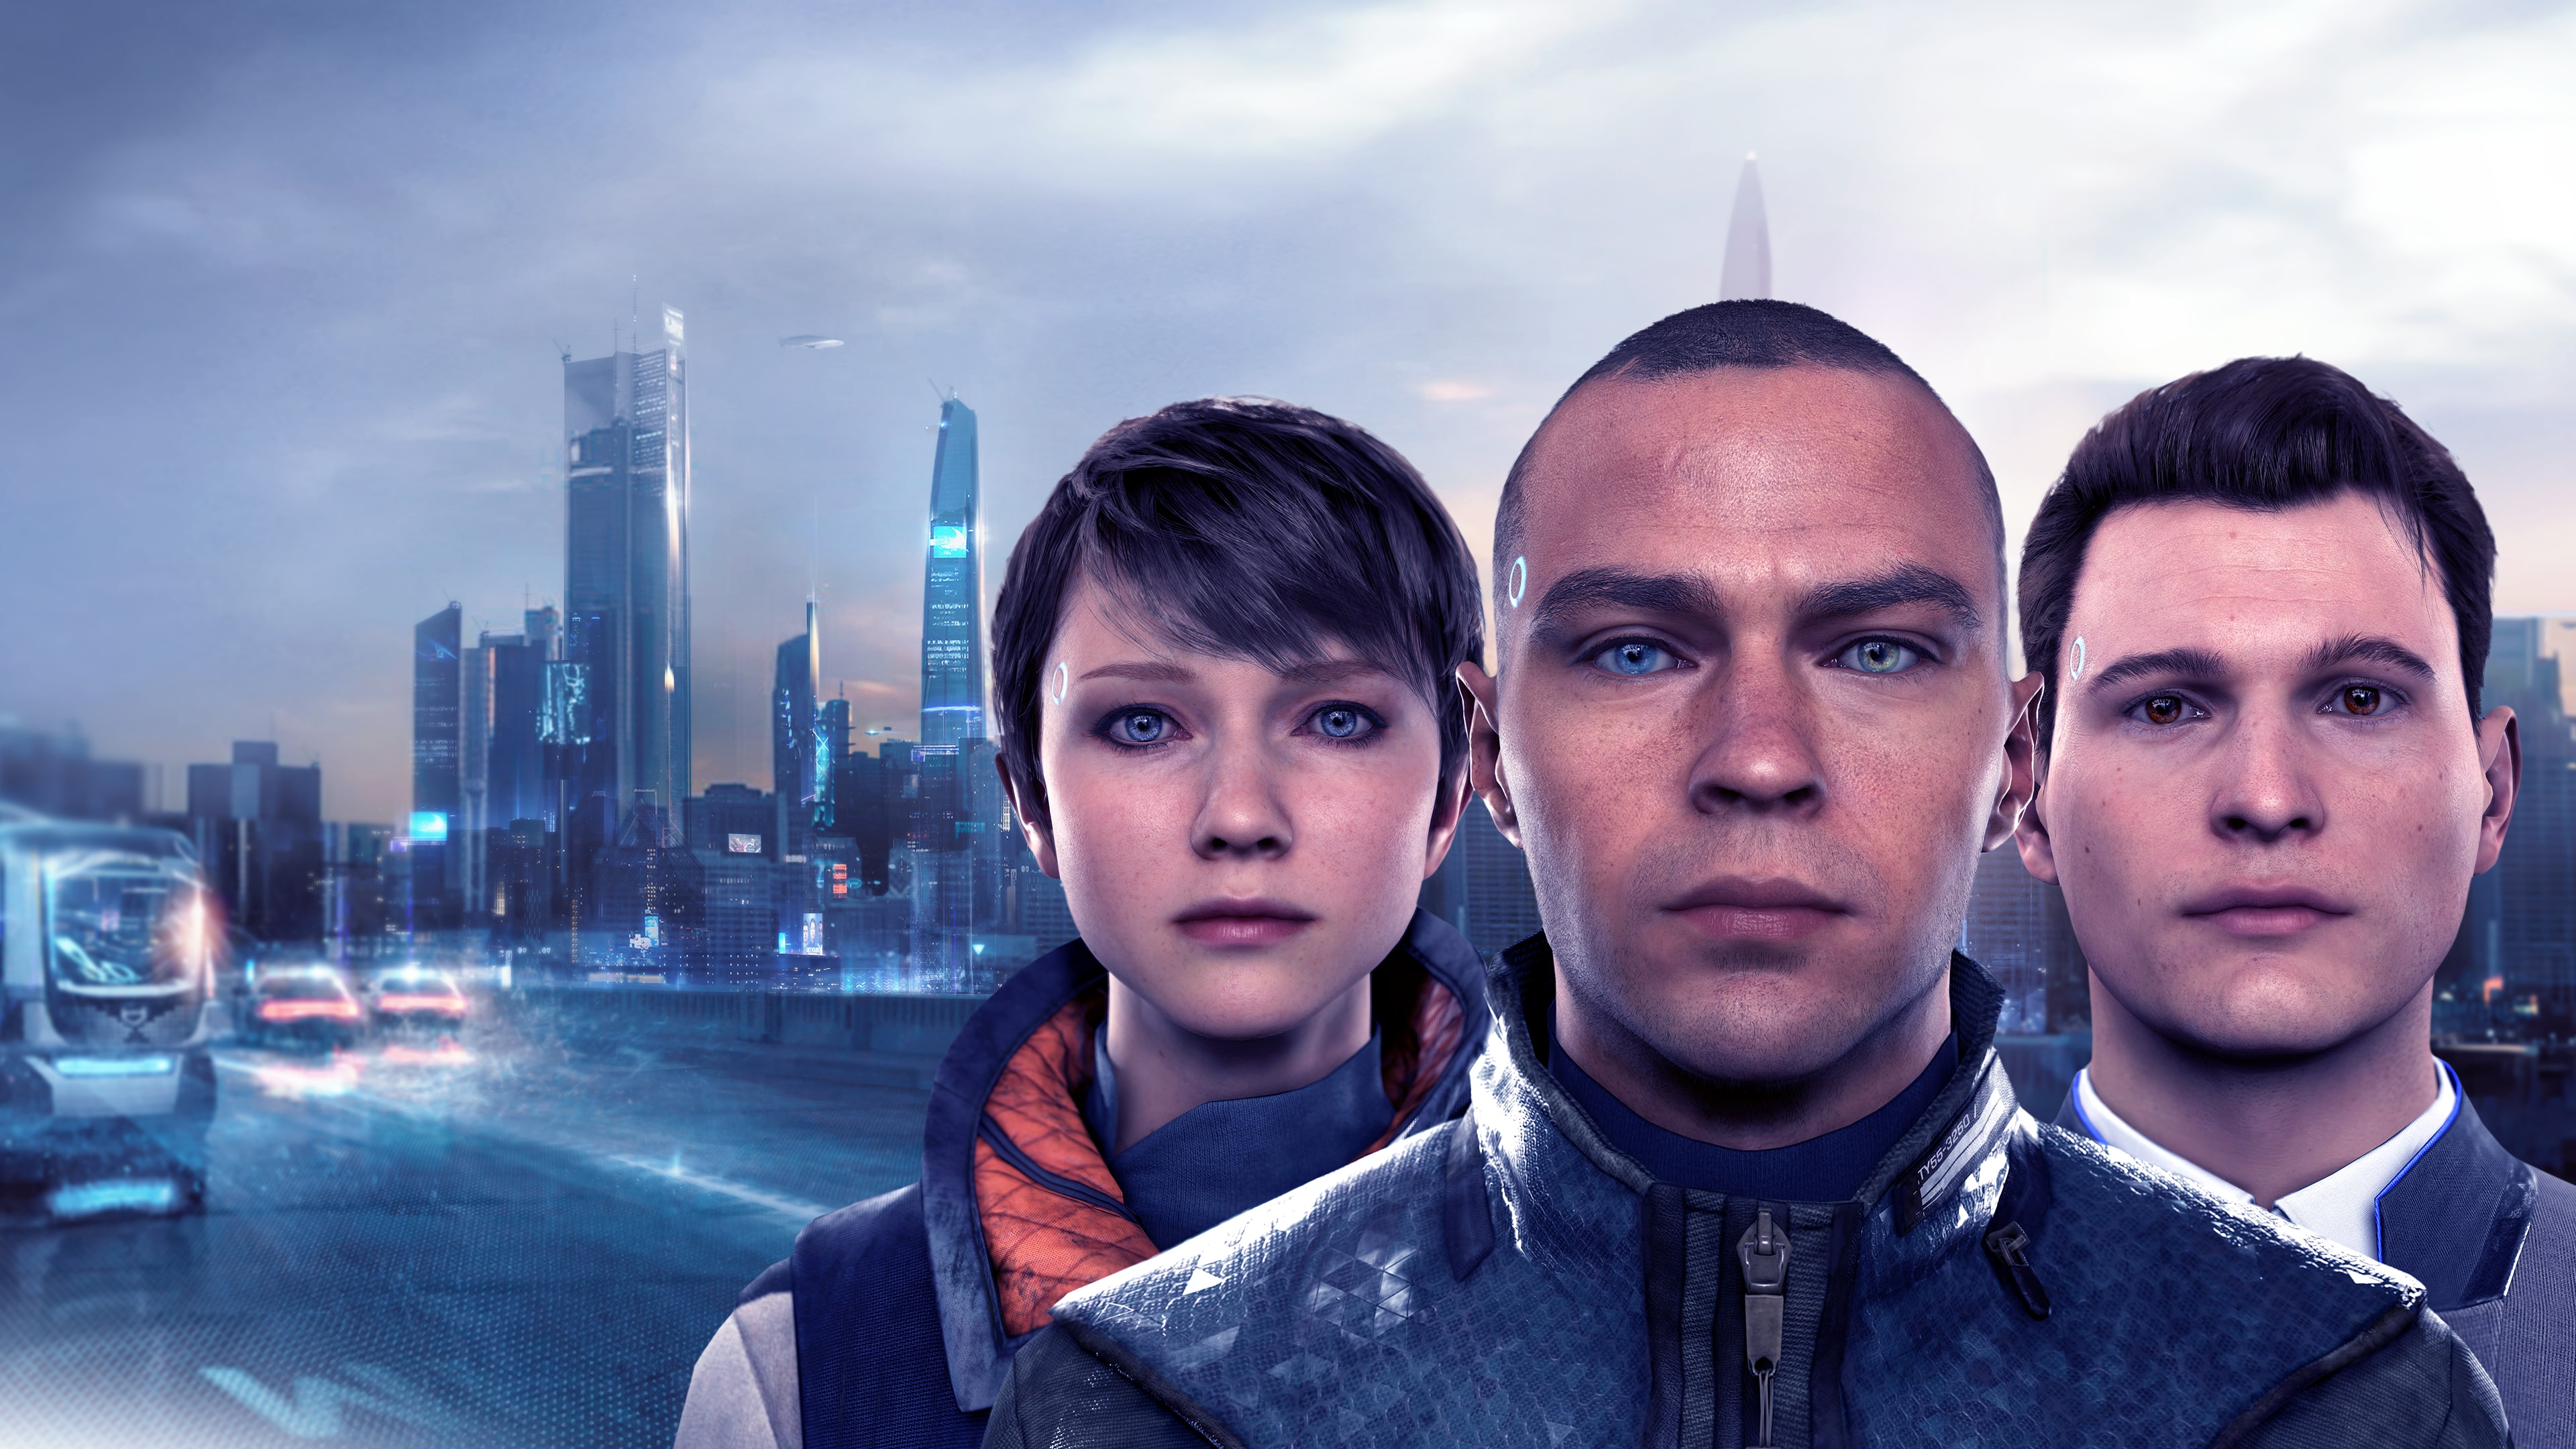 Detroit: Become Human™ Digital Deluxe Edition (English/Chinese/Korean Ver.)